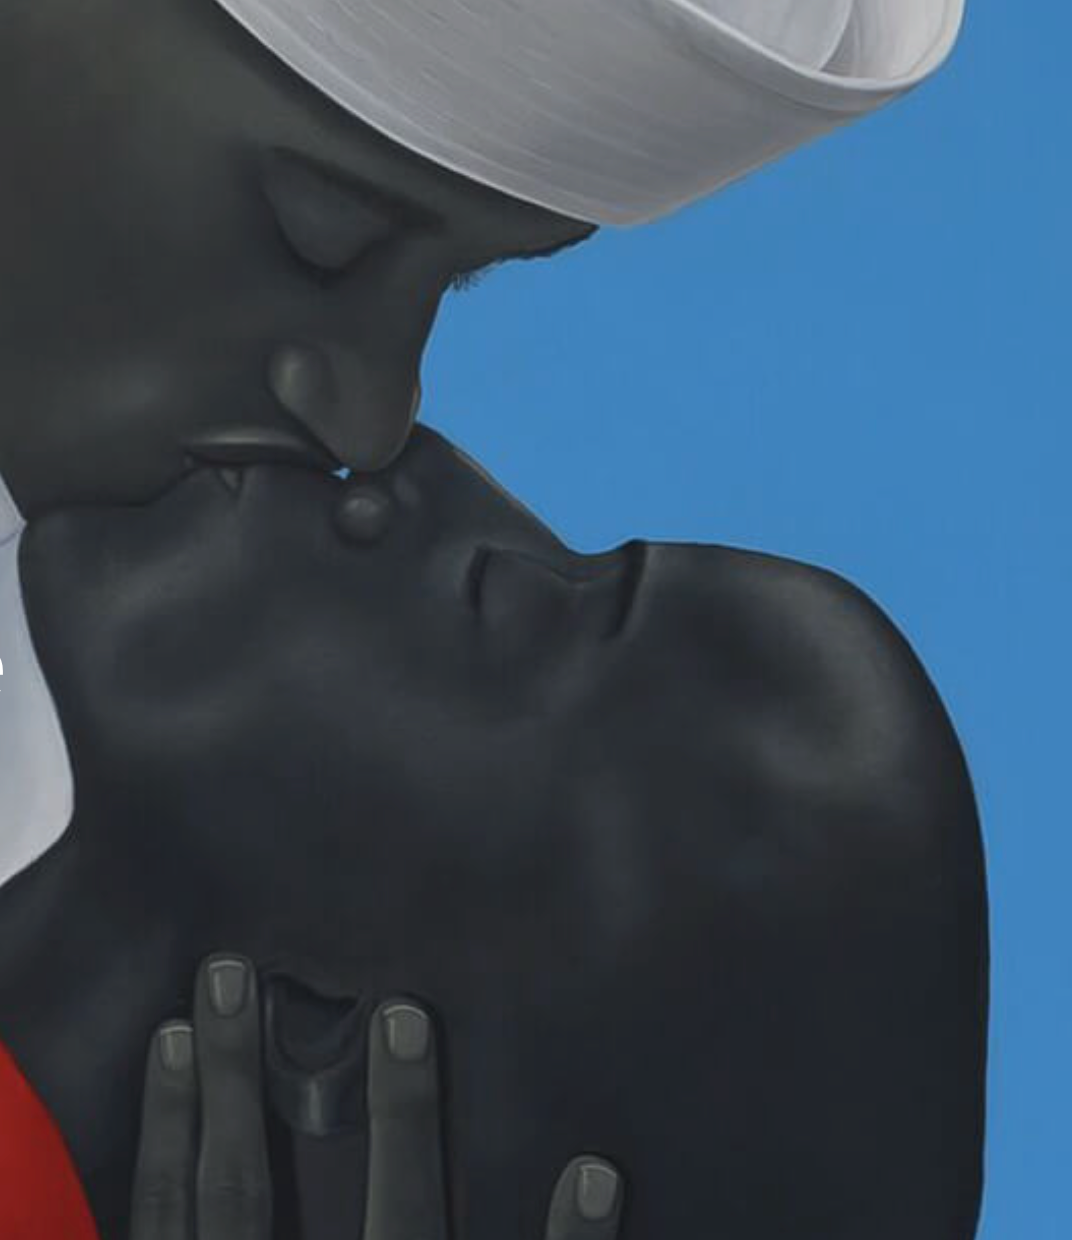 Inside page from ‘Amy Sherald: The World We Make’ featuring a close up painting of a desaturated couple kissing against a flat blue back drop